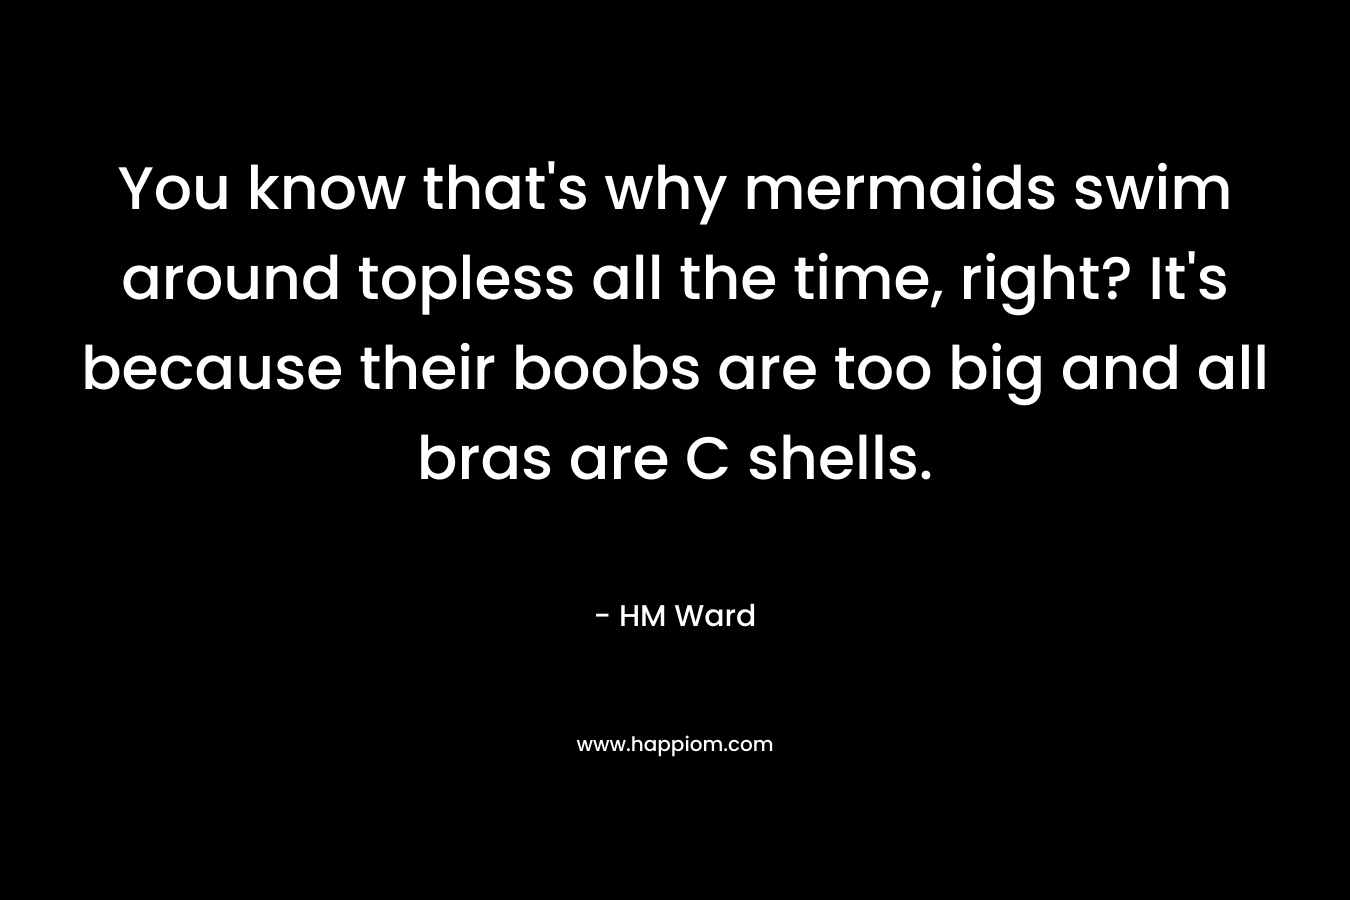 You know that's why mermaids swim around topless all the time, right? It's because their boobs are too big and all bras are C shells.